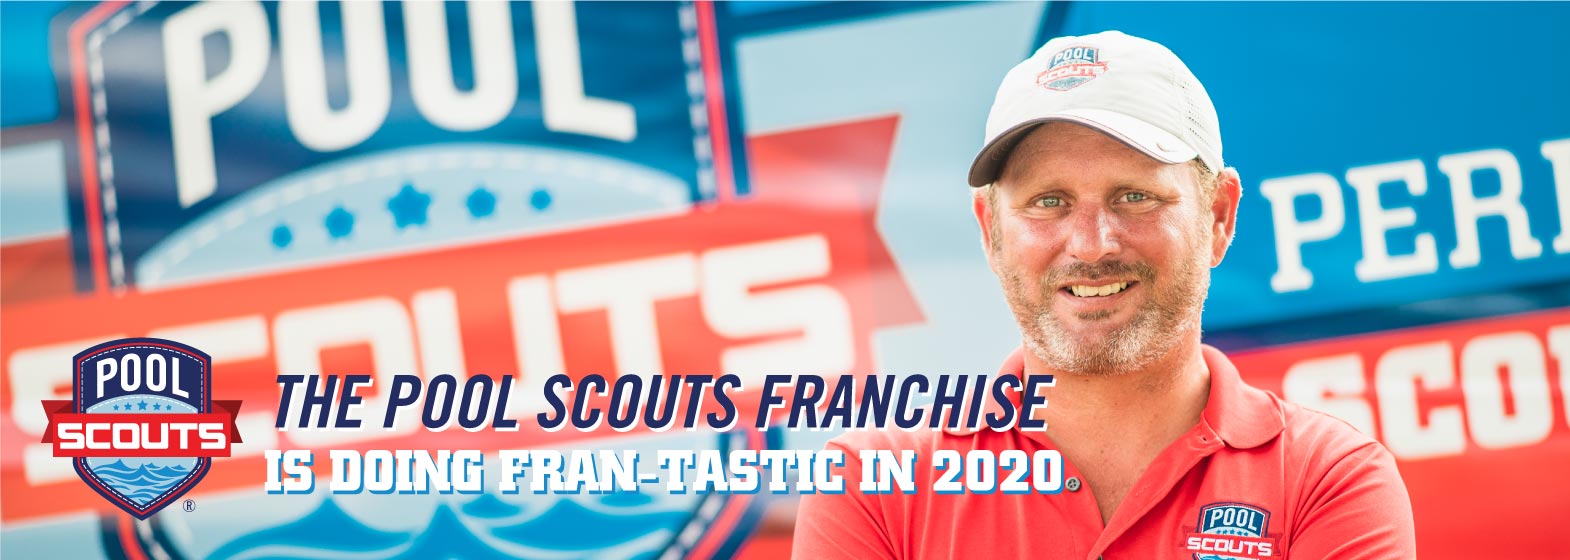 Image of The Pool Scouts Franchise is Doing FRAN-TASTIC in 2020!